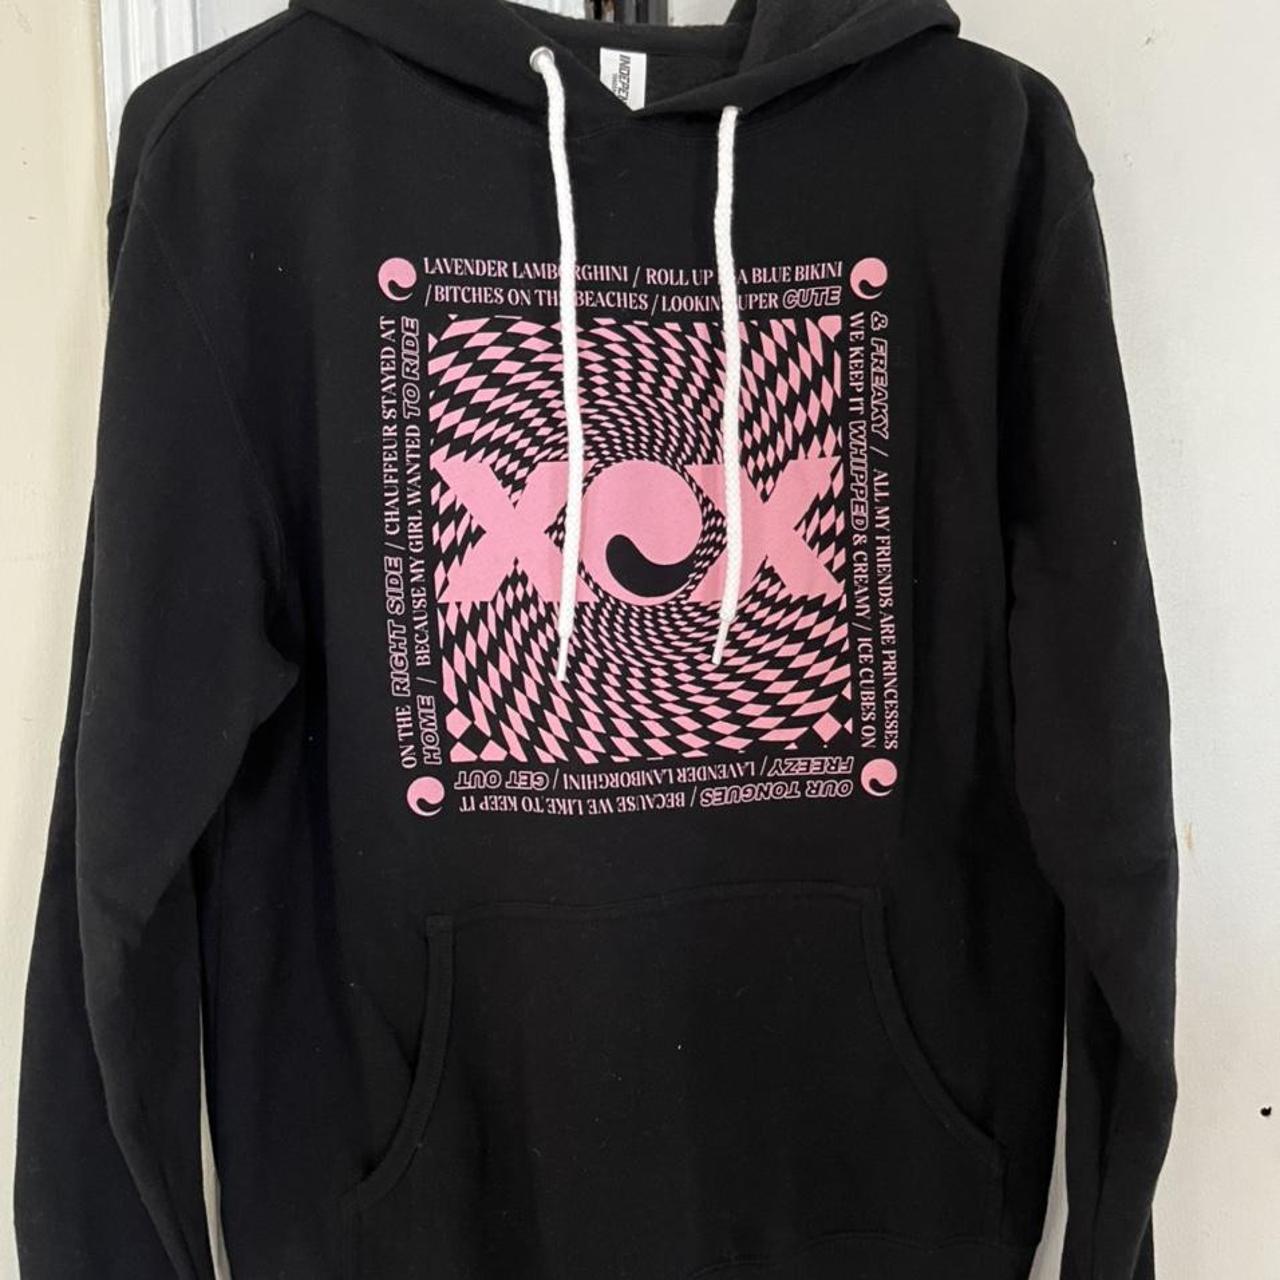 official merch hoodie from charli xcx’s 2019 charli... - Depop